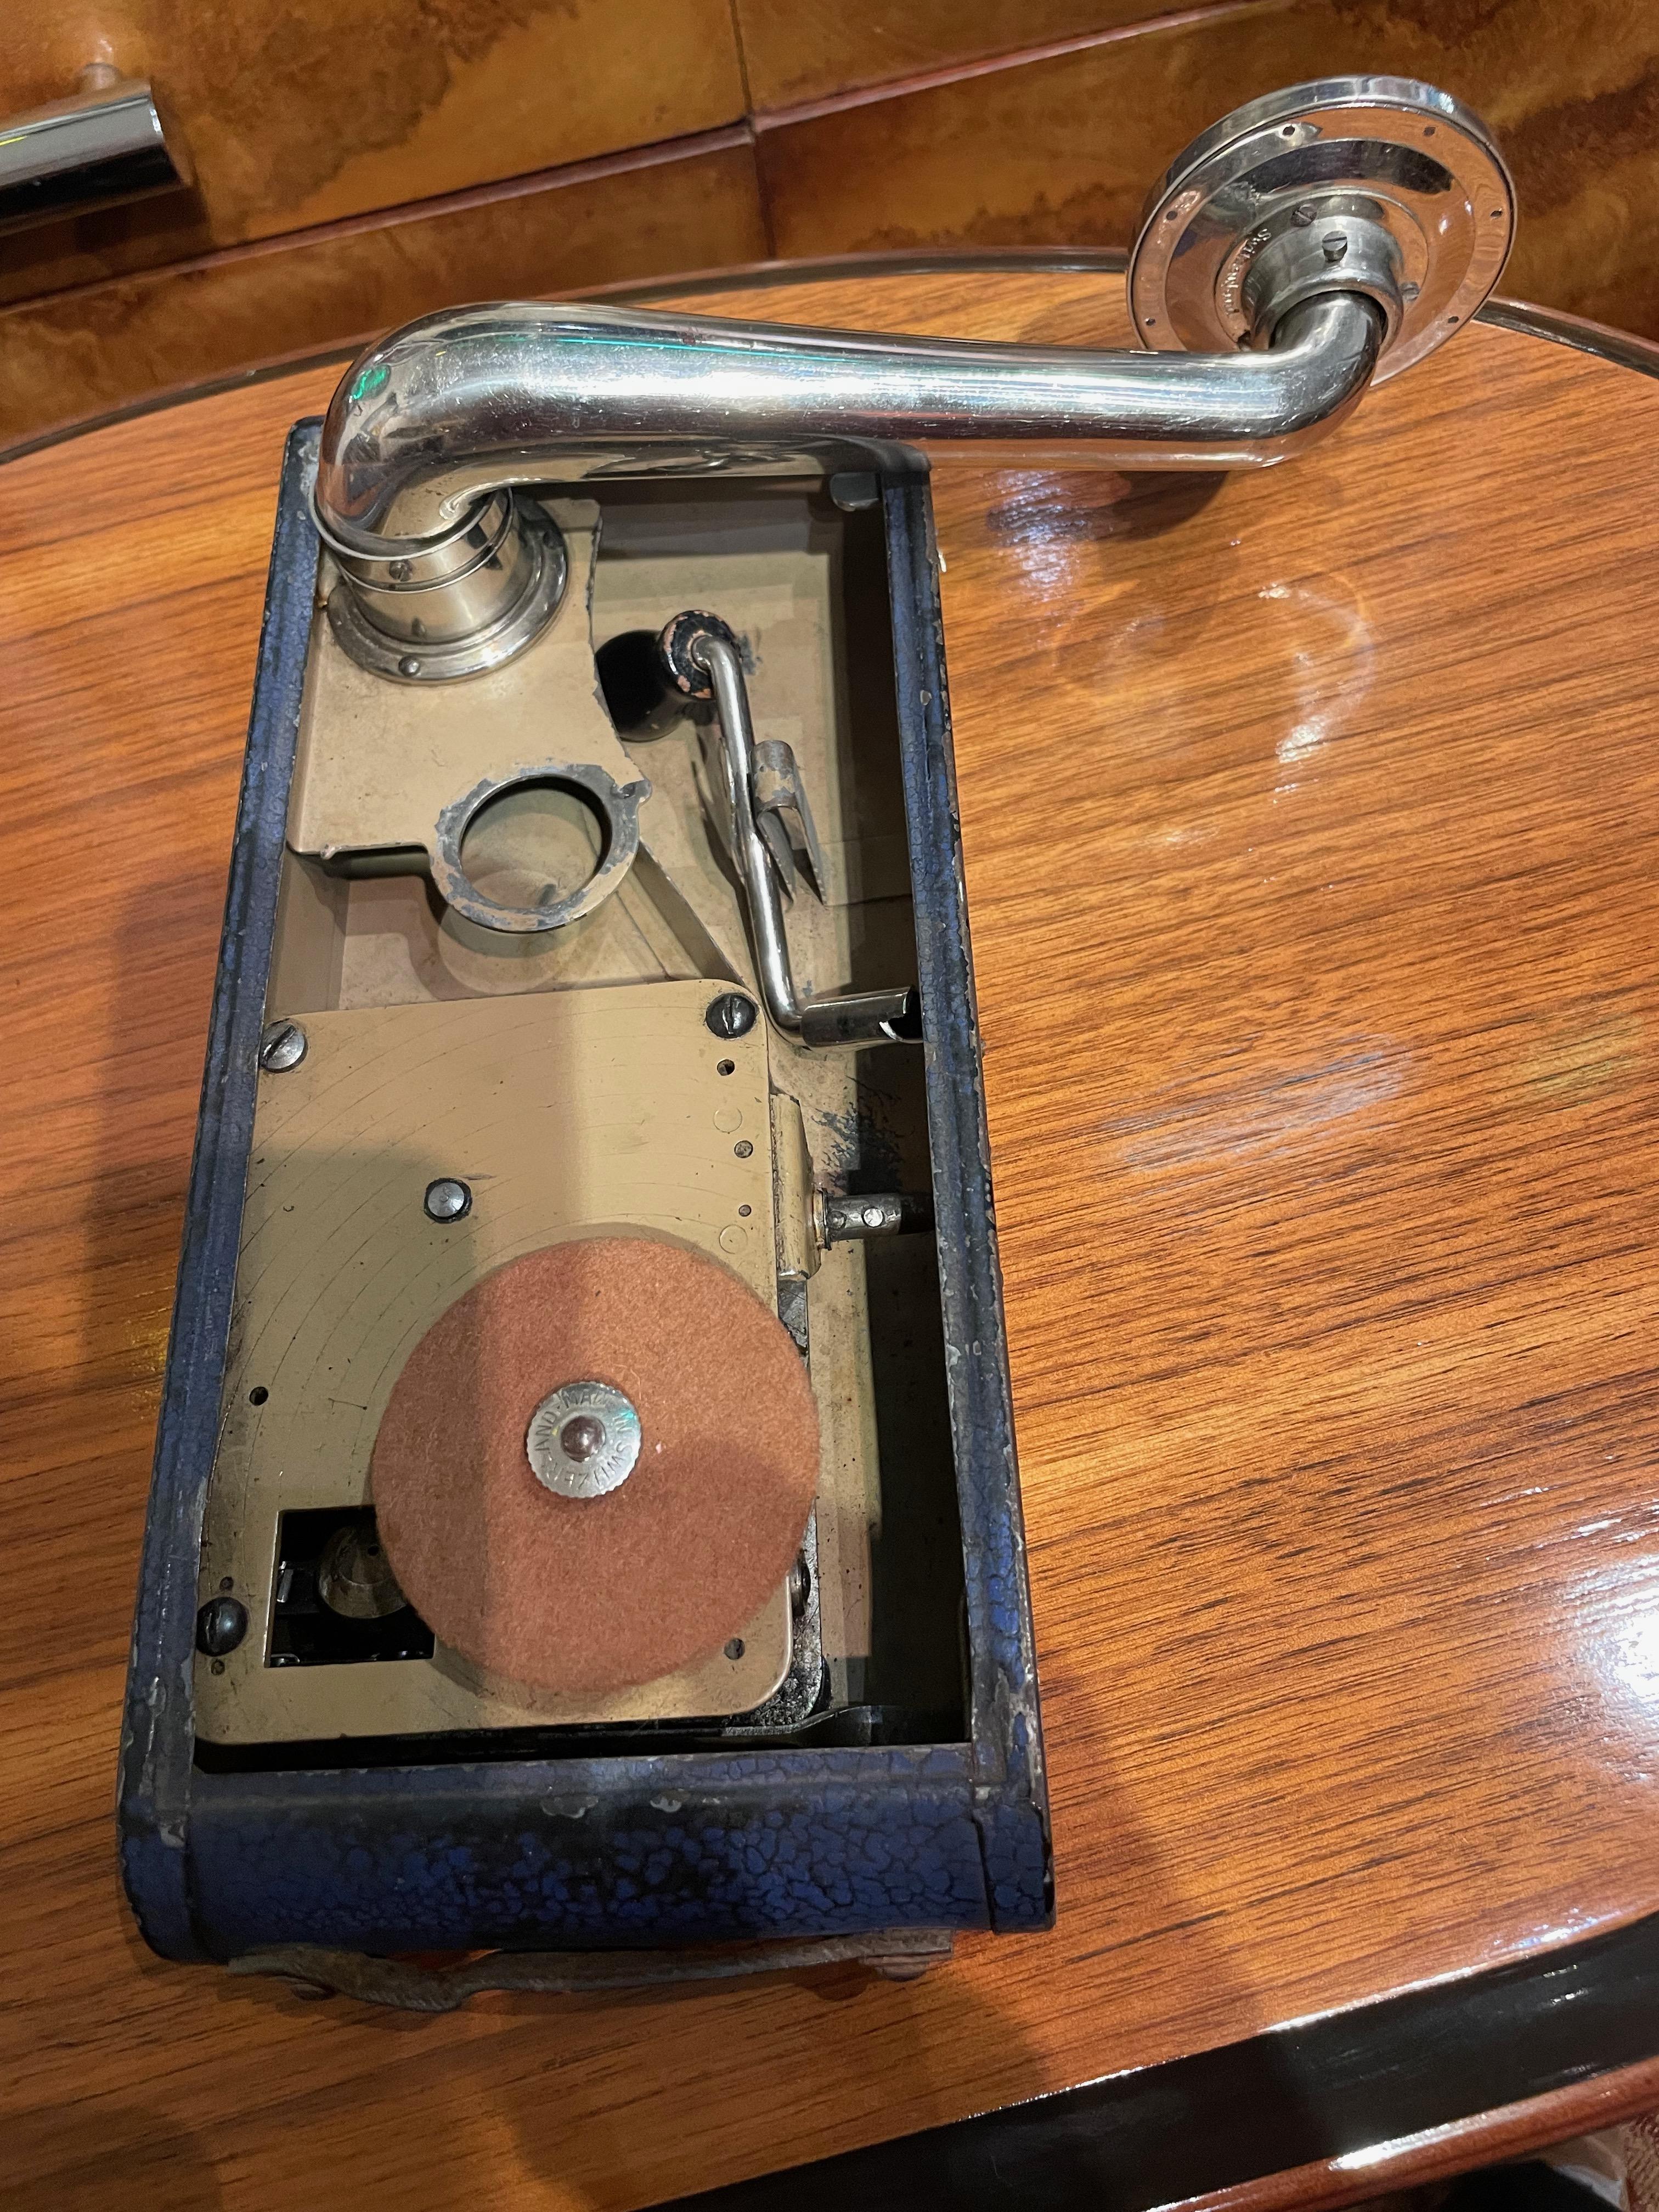 This is an authentic Excelda portable gramophone, the portable phonograph of the 1930's that resembled the pocket cameras of that time (usually referred to as a “Cameraphone”). It was made by Thorens, the famous Swiss manufacturer of gramophones,